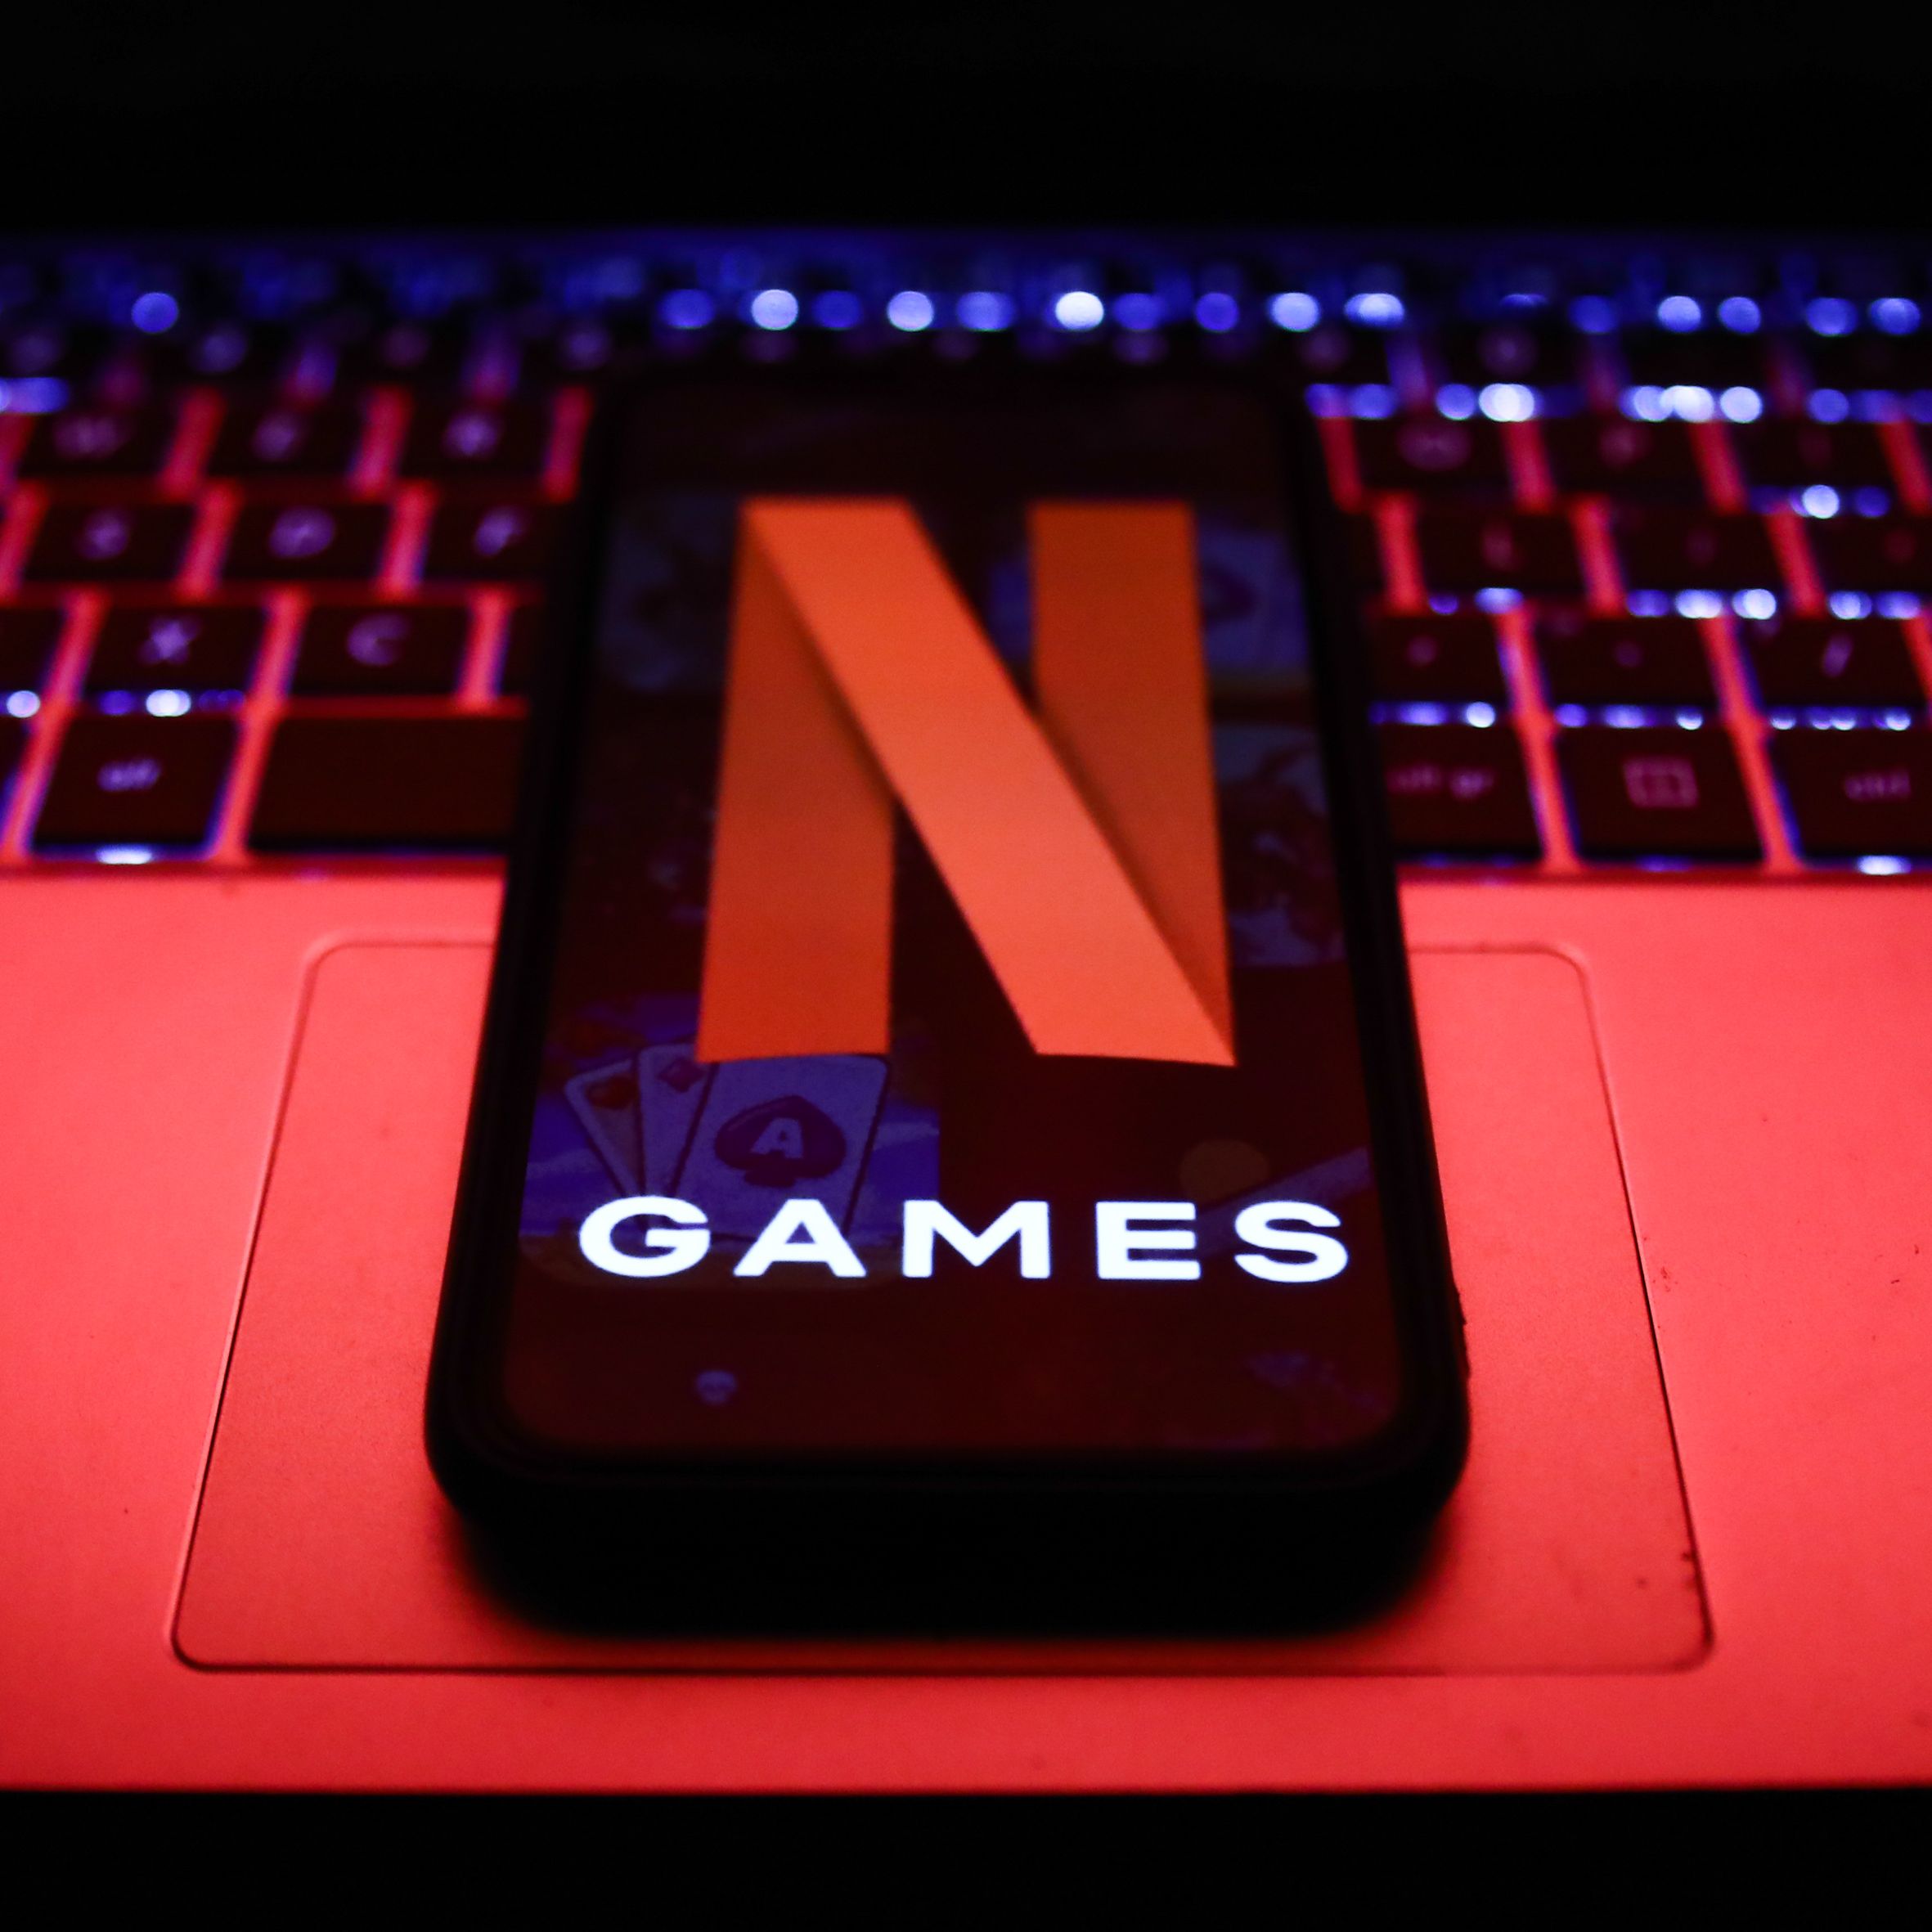 What You Need to Know About Netflix's New Games App